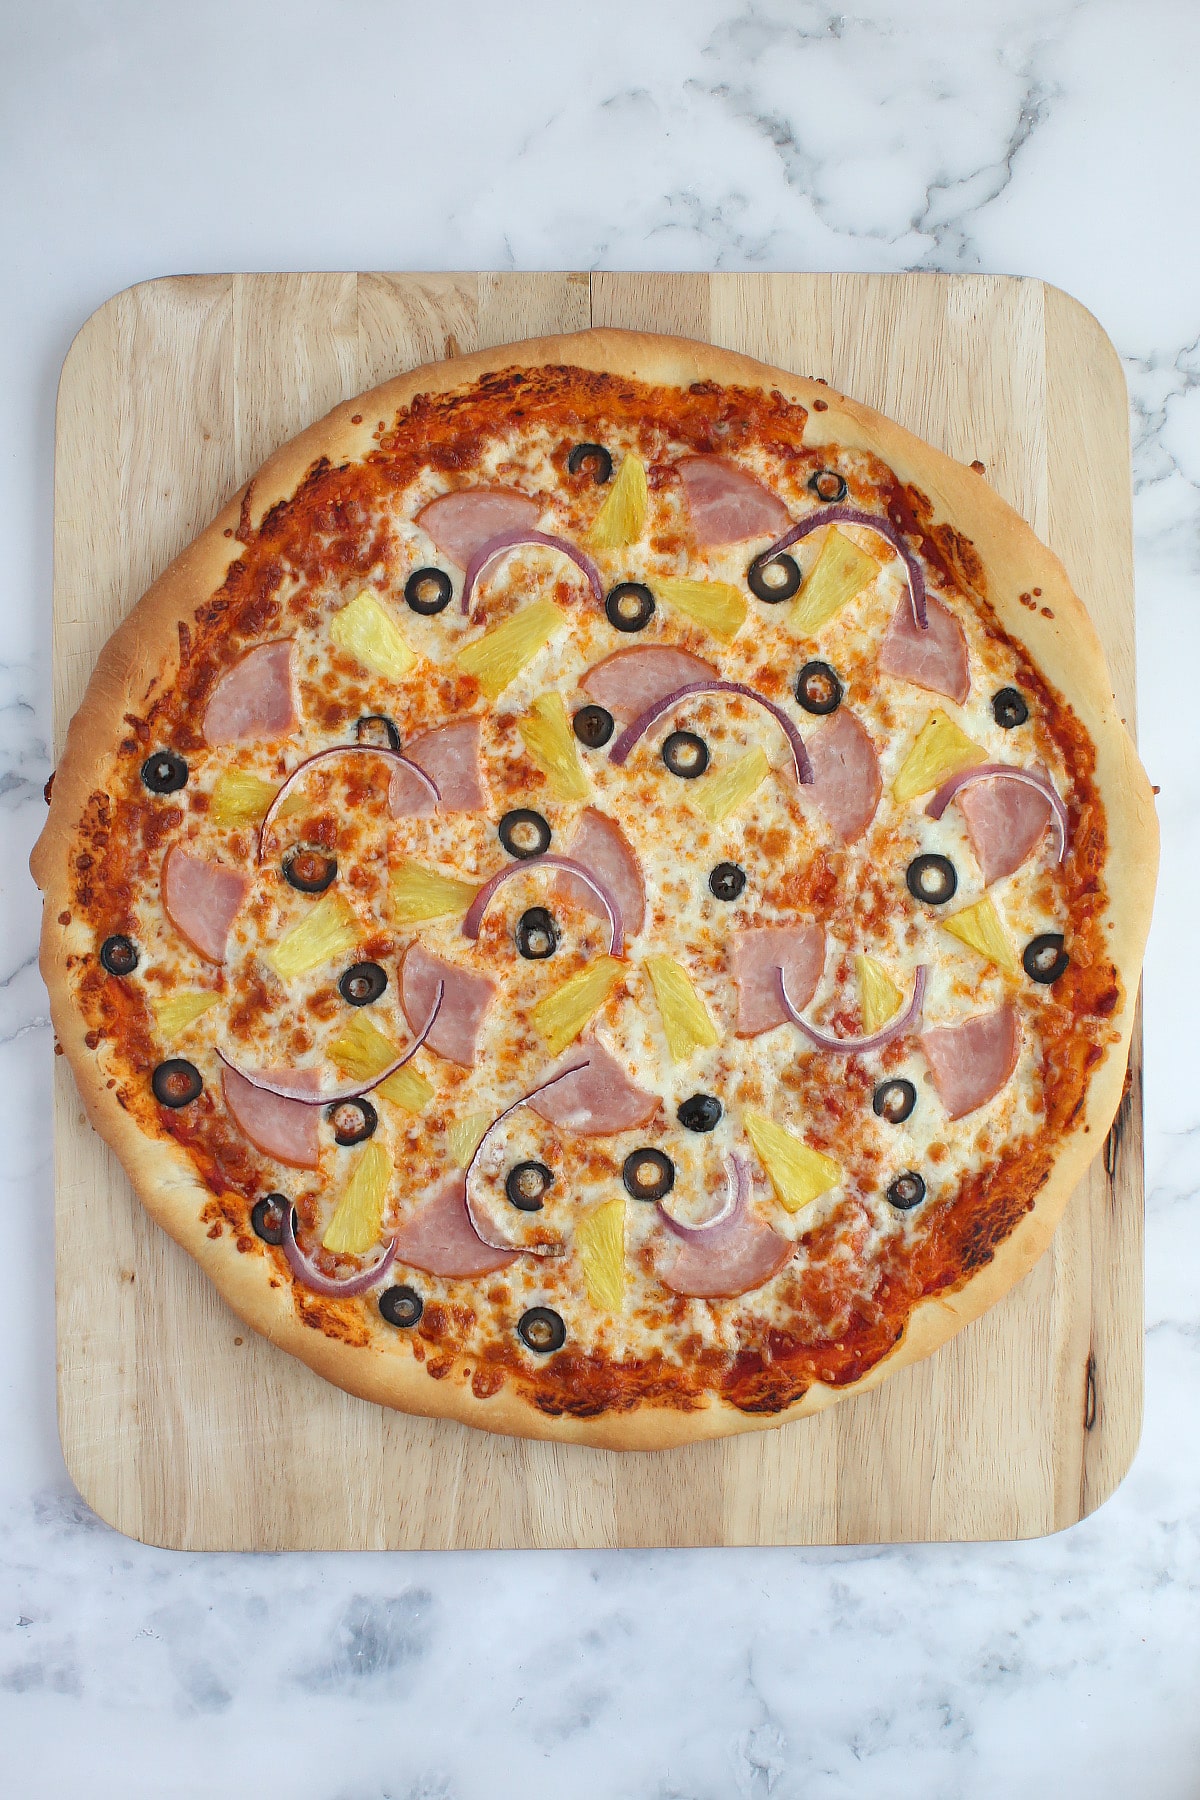 A homemade pizza topped with ham, pineapple, red onions and olives.